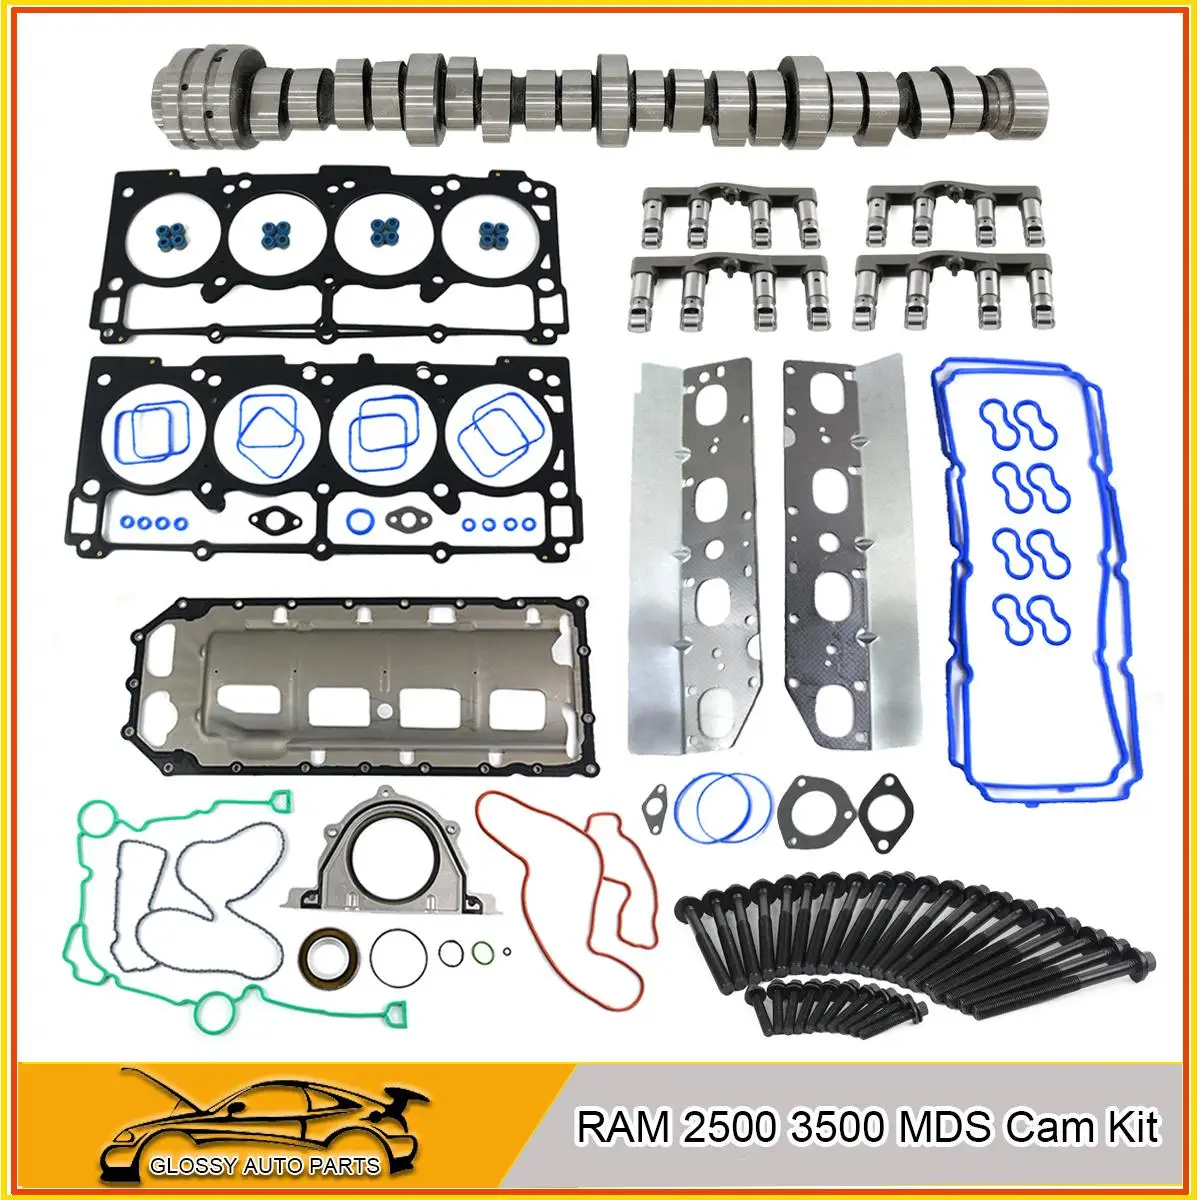 

AP01 For Ram 2500 3500 5.7L V8 HEMI MDS Engine Timing Chain Kit Cam Lifters 09-15 53021726AE 53021726AD 53021720AB 53021720AD